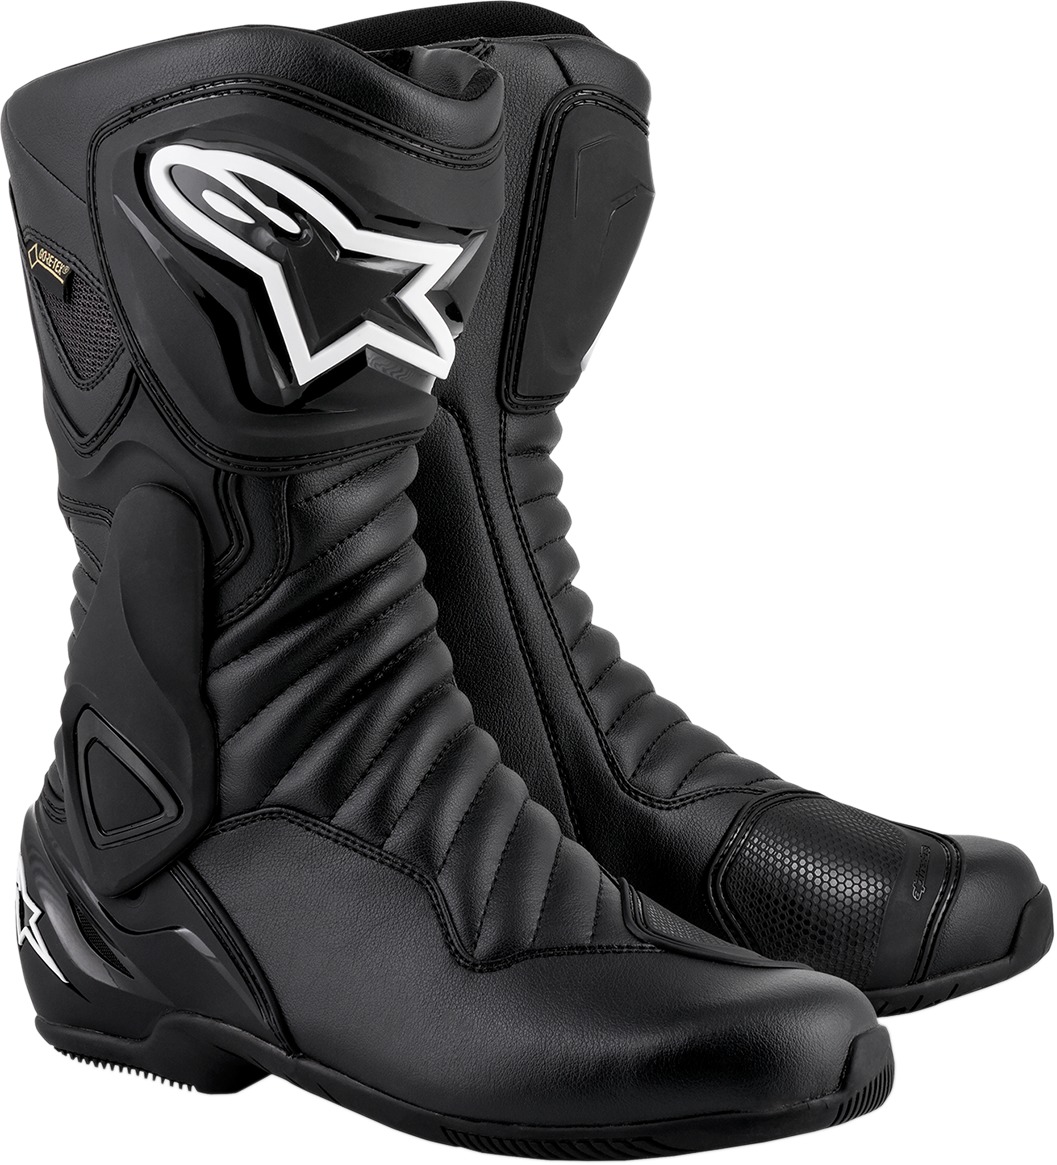 SMX-6 GTX Street Riding Boots Black US 11.5 - Click Image to Close